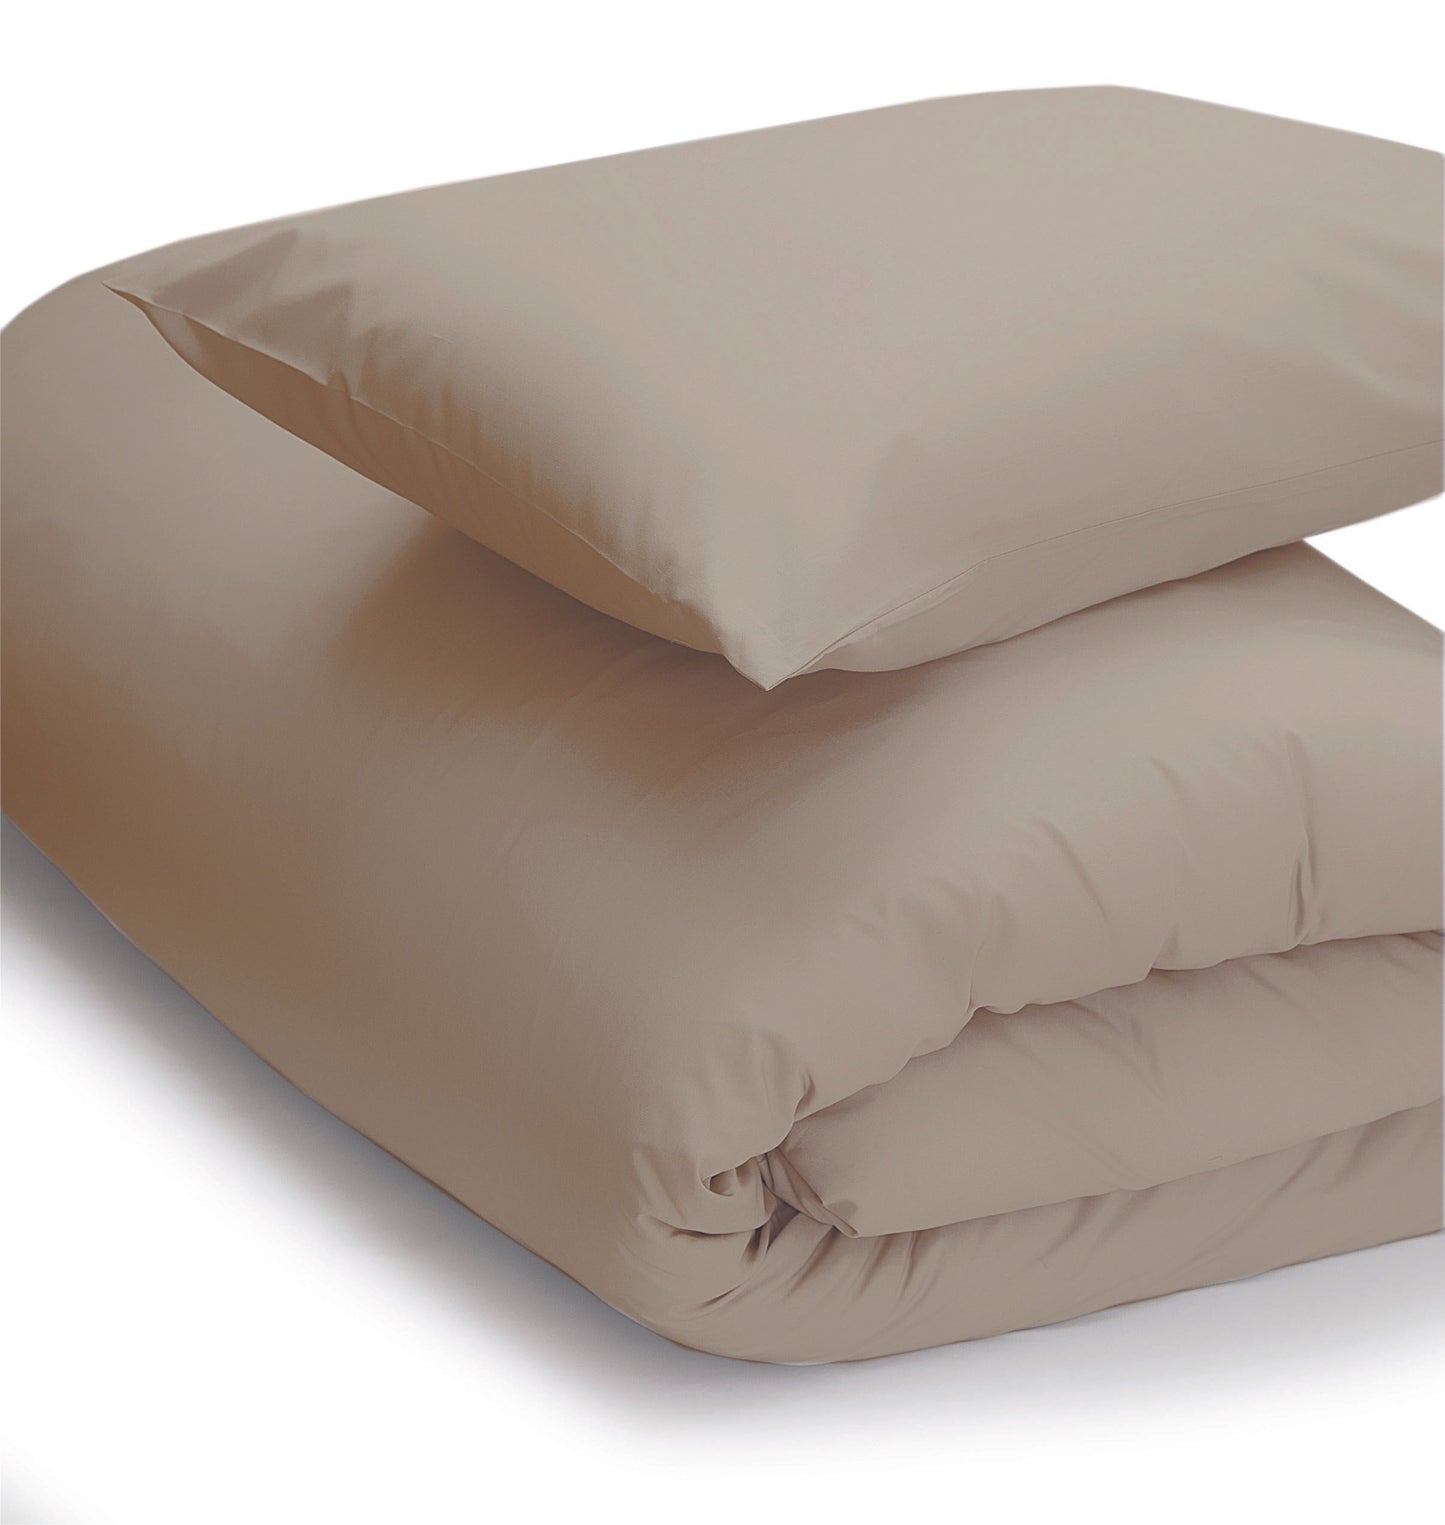 Signature Double Right Hand shape Bedding pack